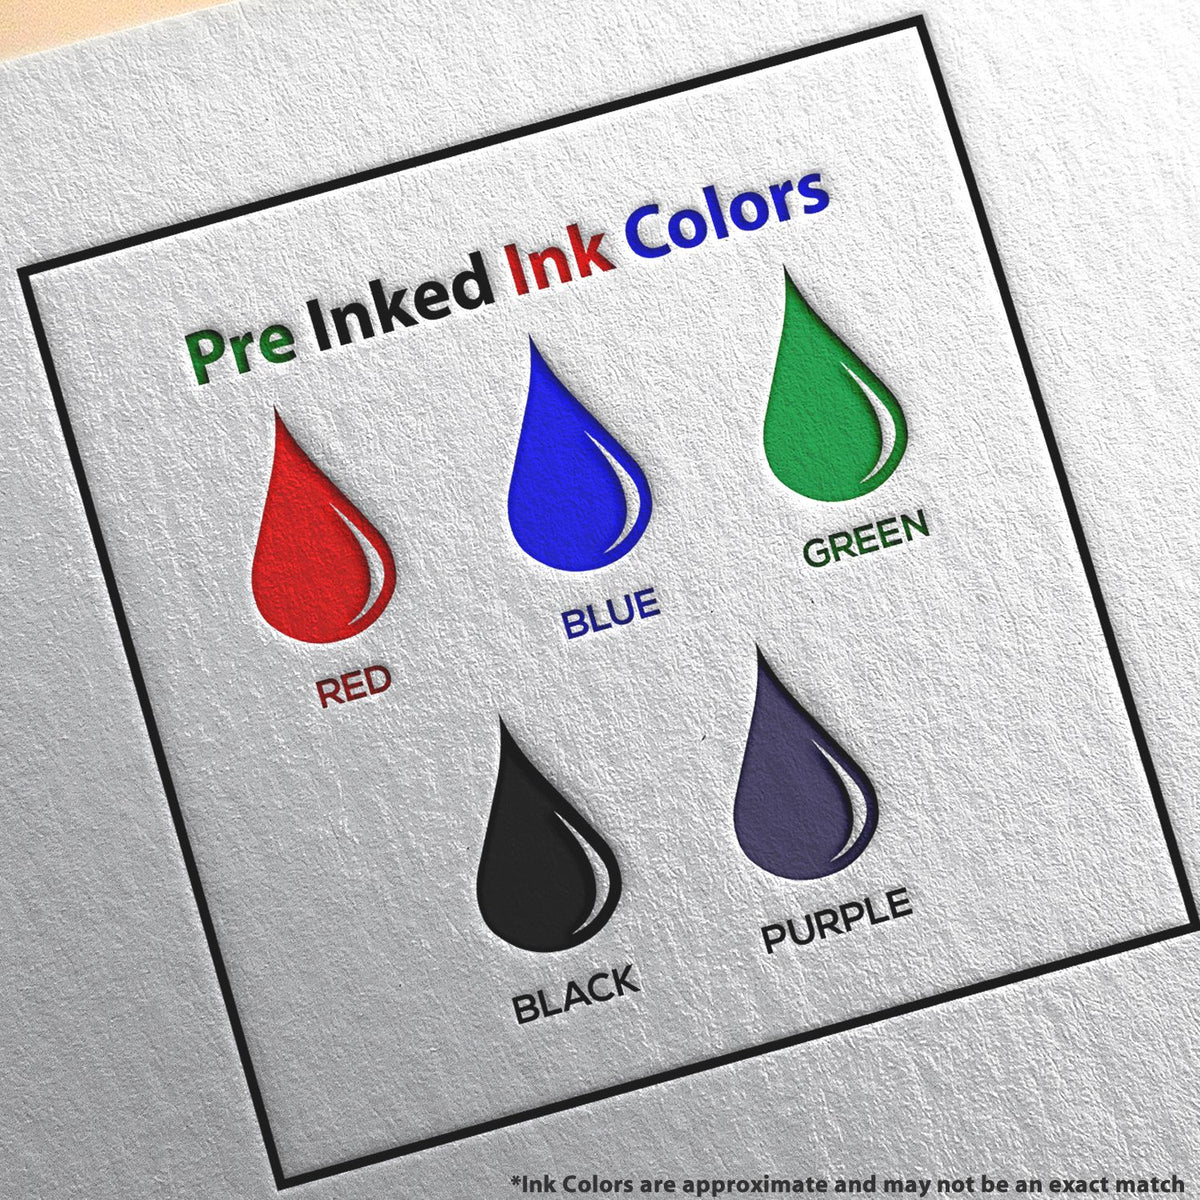 A picture showing the different ink colors or hues available for the Premium MaxLight Pre-Inked Maine Engineering Stamp product.